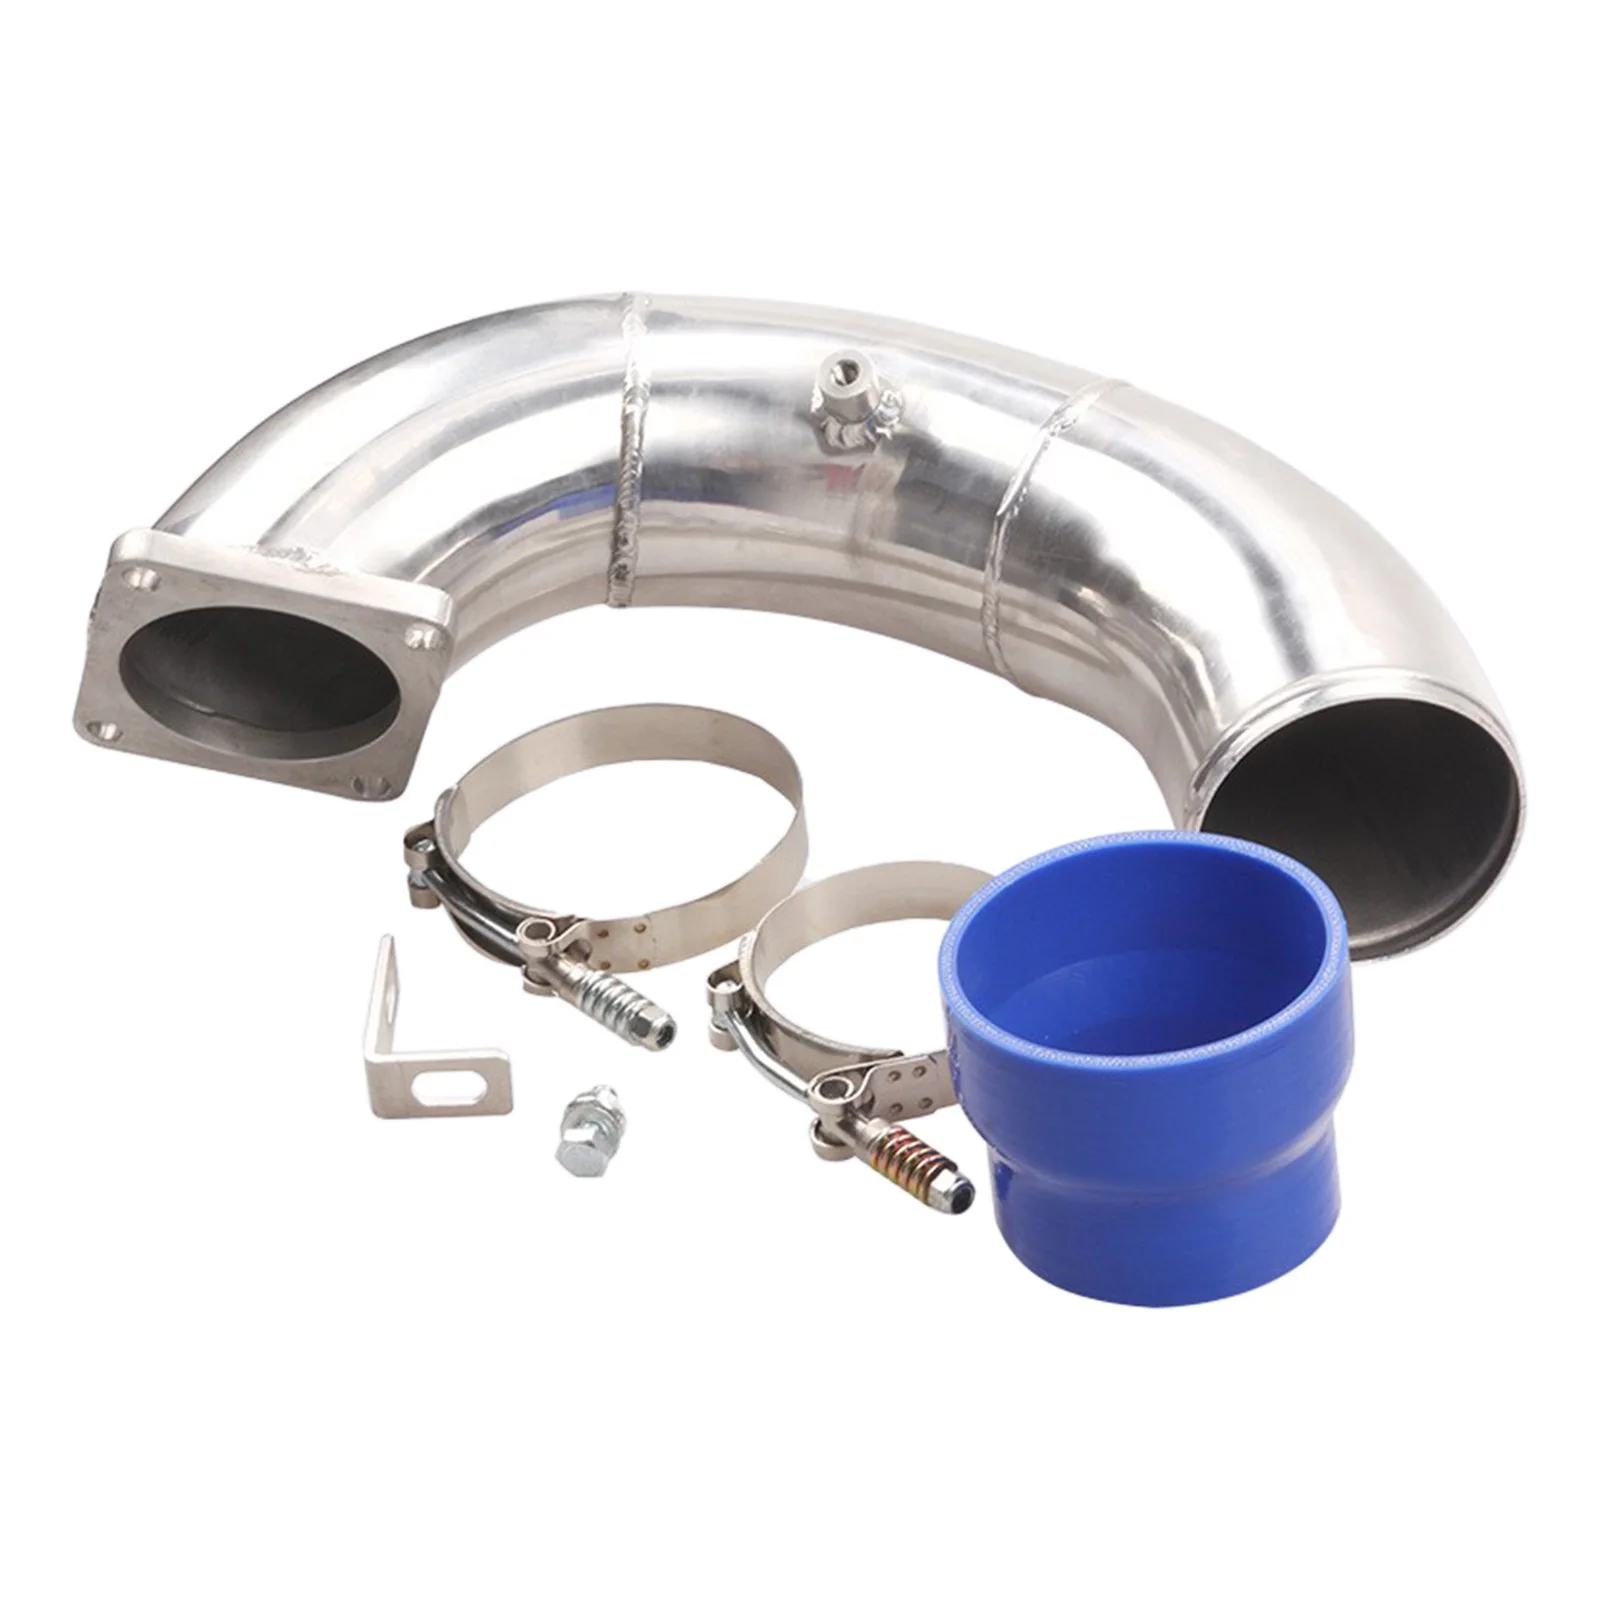 

Topteng 3.5" Air Intake Elbow Charge Pipe for 1994-1998 Dodge 5.9L 12V Cummins Diesel